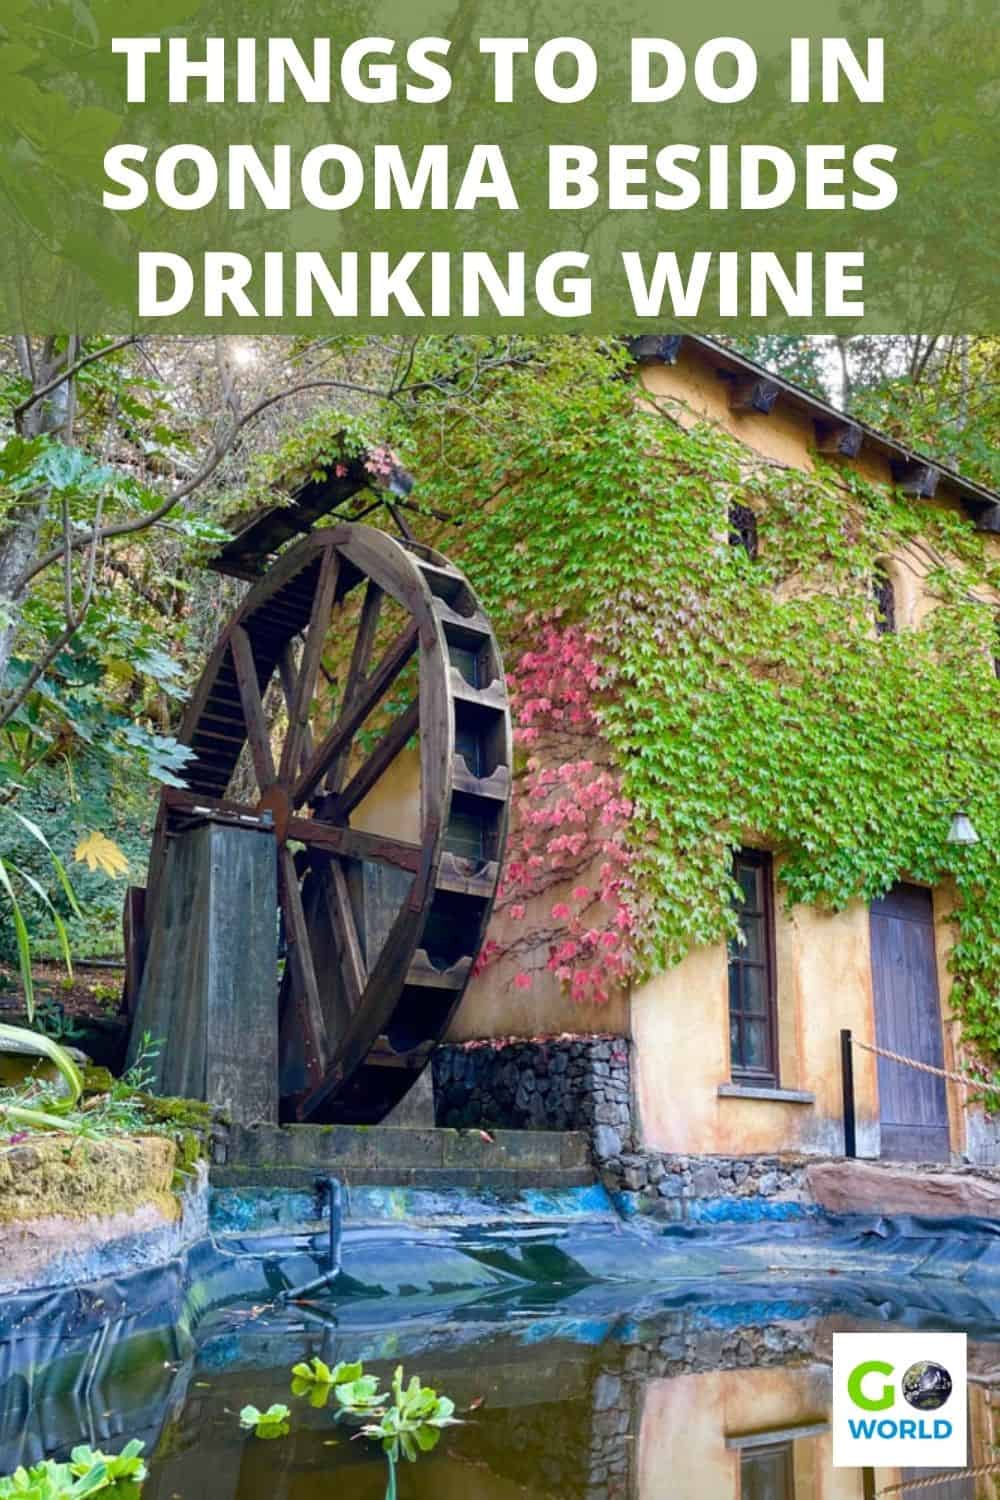 Looking for things to do in Sonoma other than drinking wine? Check out this list of fun Sonoma activites that don't require wine tasting. #Sonoma #California #Sonomavalleycalifornia